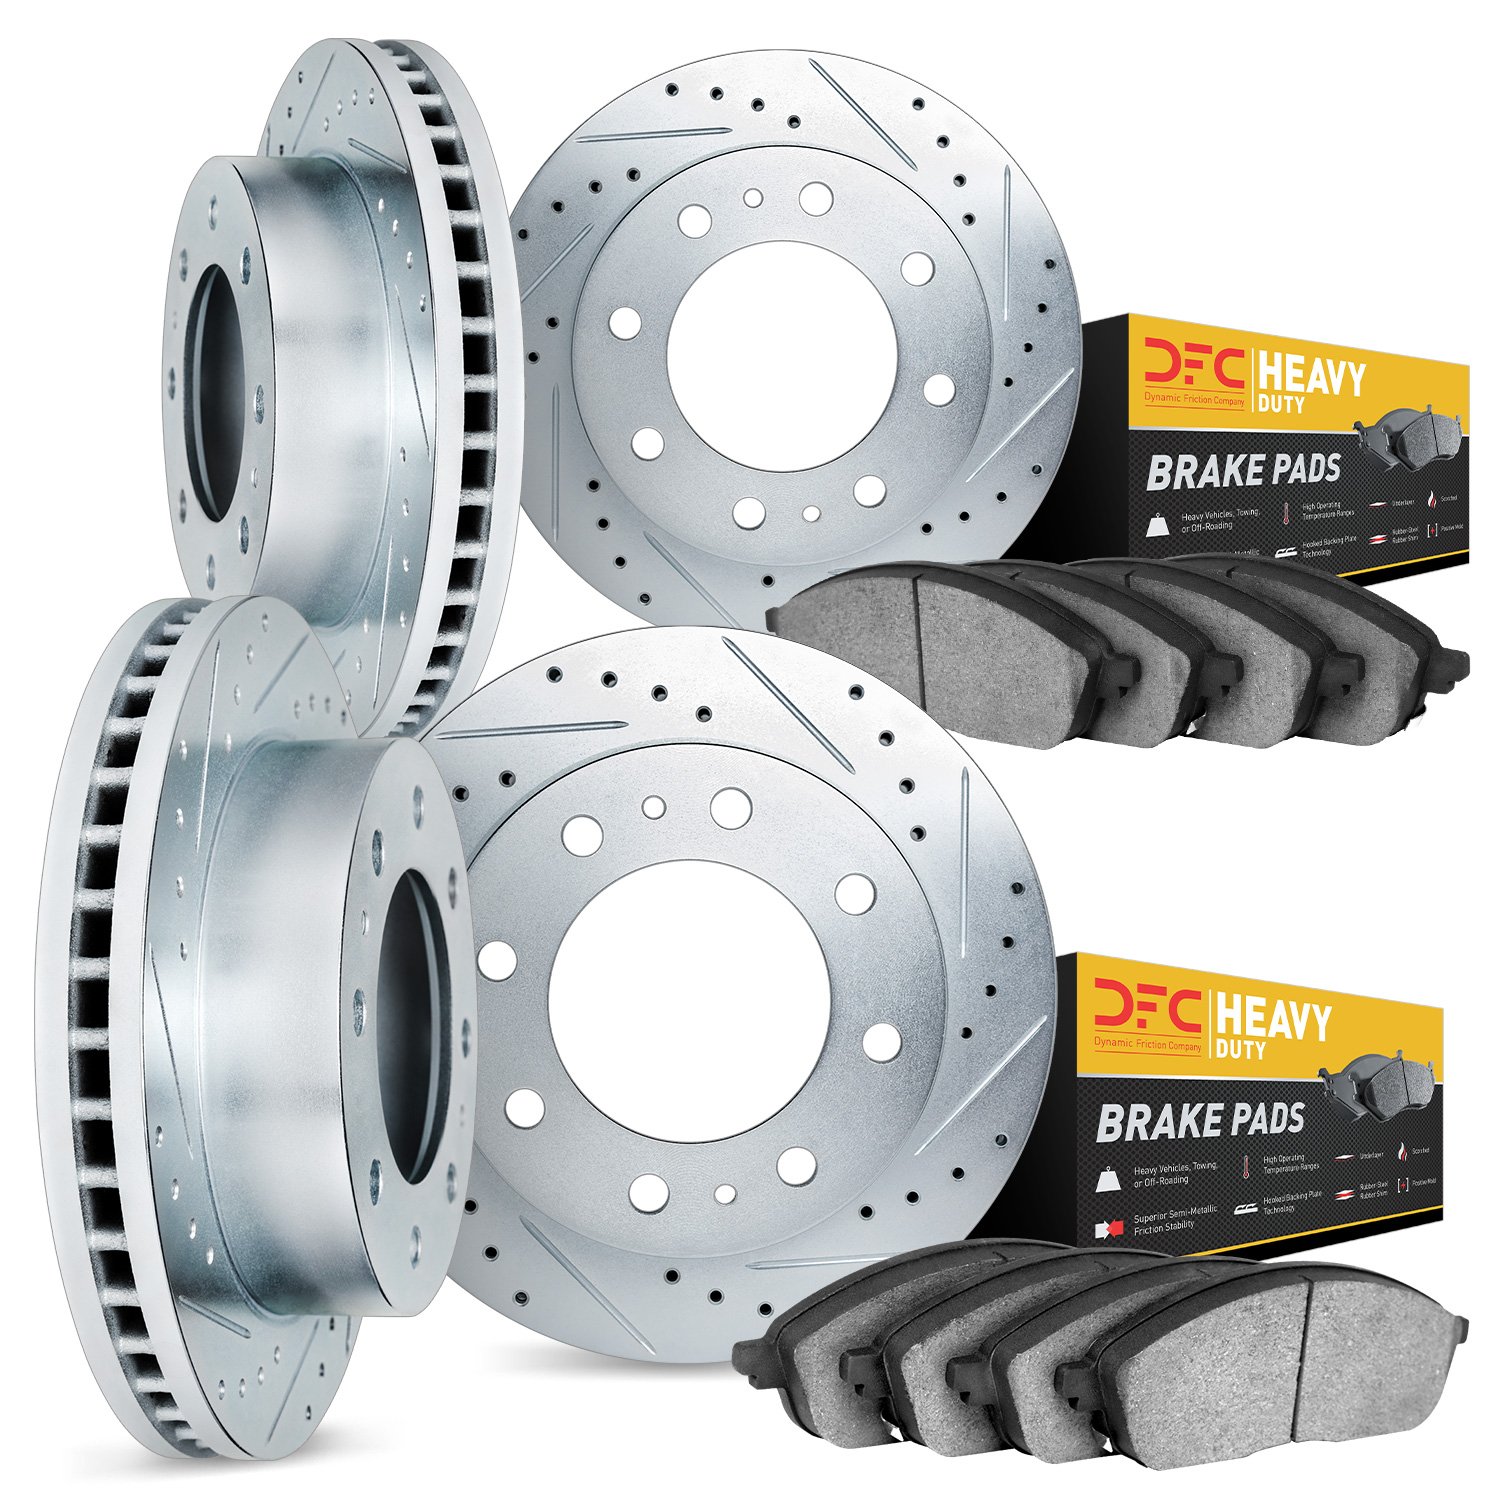 7204-48136 Drilled/Slotted Rotors w/Heavy-Duty Brake Pads Kit [Silver], 2003-2017 GM, Position: Front and Rear